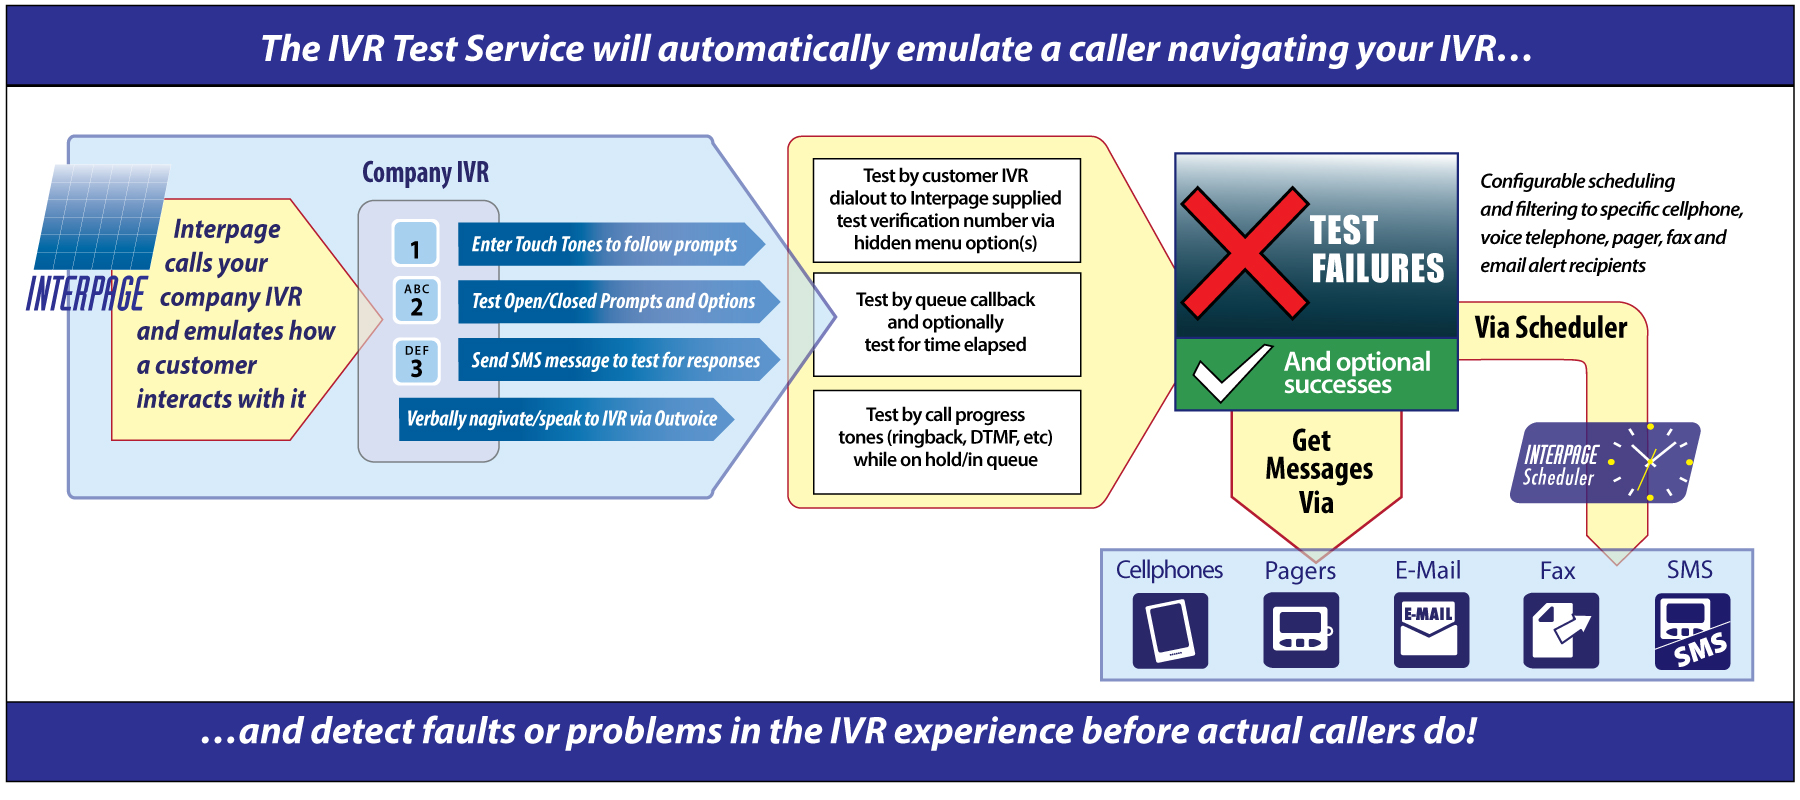 Chart of the Interpage Interactive Voice Response (IVR), Auto-Attendant, and Telephone System Test Service, which regularly tests a given IVR, menu-based auto attendant, or telephone service to ensure that it is running properly and processing calls, and which will send failure alterts to cellular/smartphones, e-mail, fax, verbal/voice notification (with receipt confirmation) to landline (and cellular phones), and other end devices such as alpha and numeric pagers.